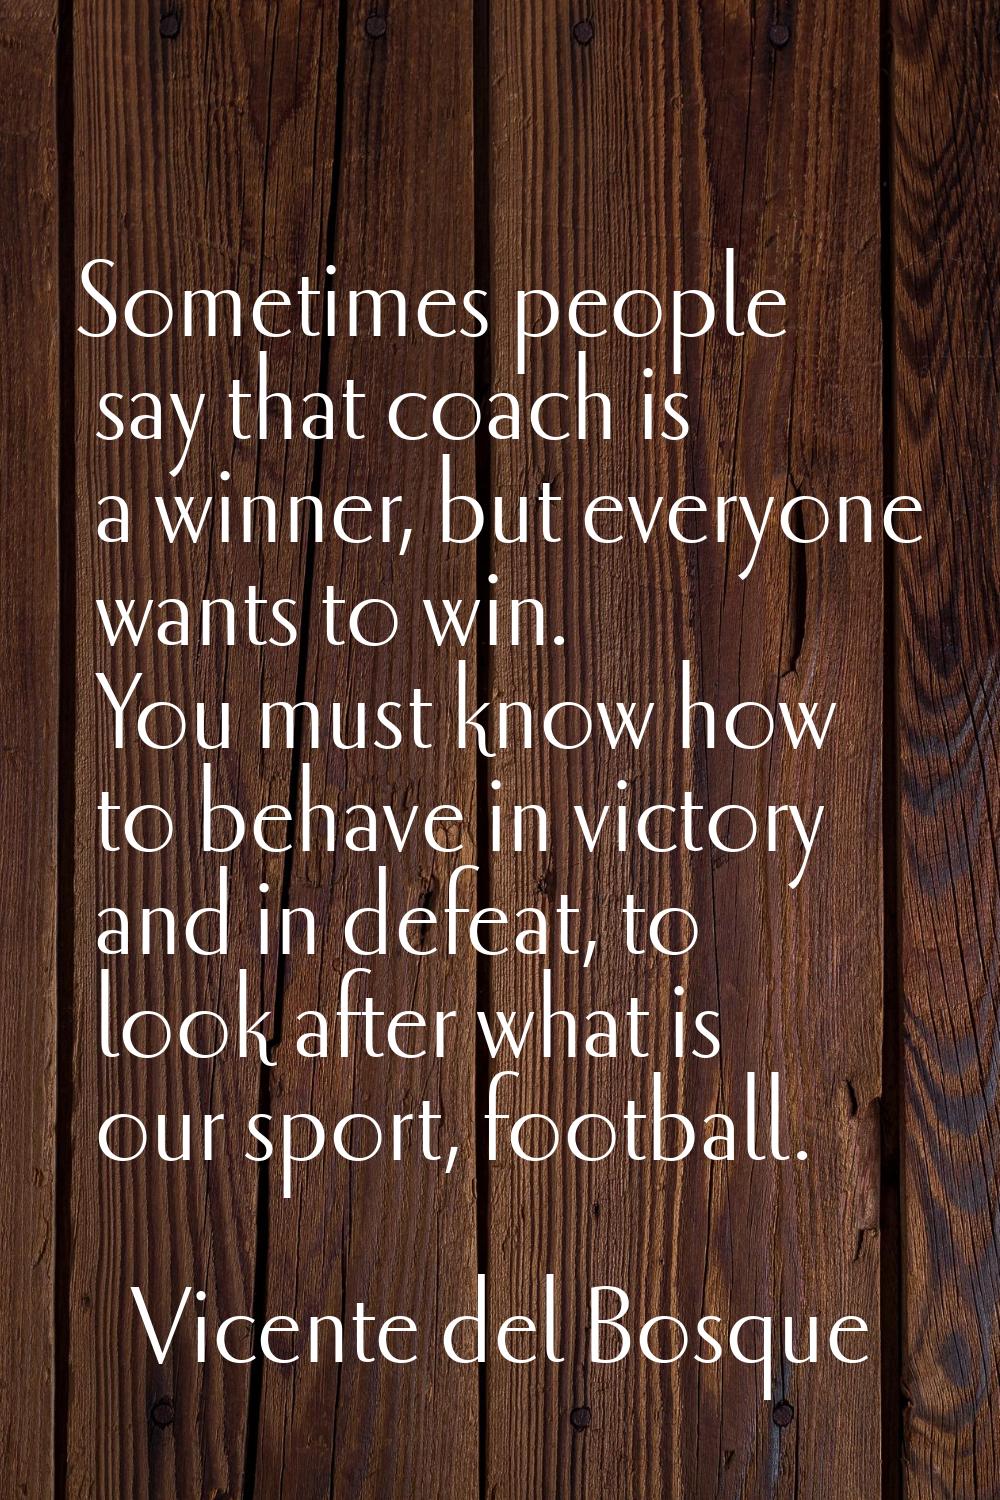 Sometimes people say that coach is a winner, but everyone wants to win. You must know how to behave